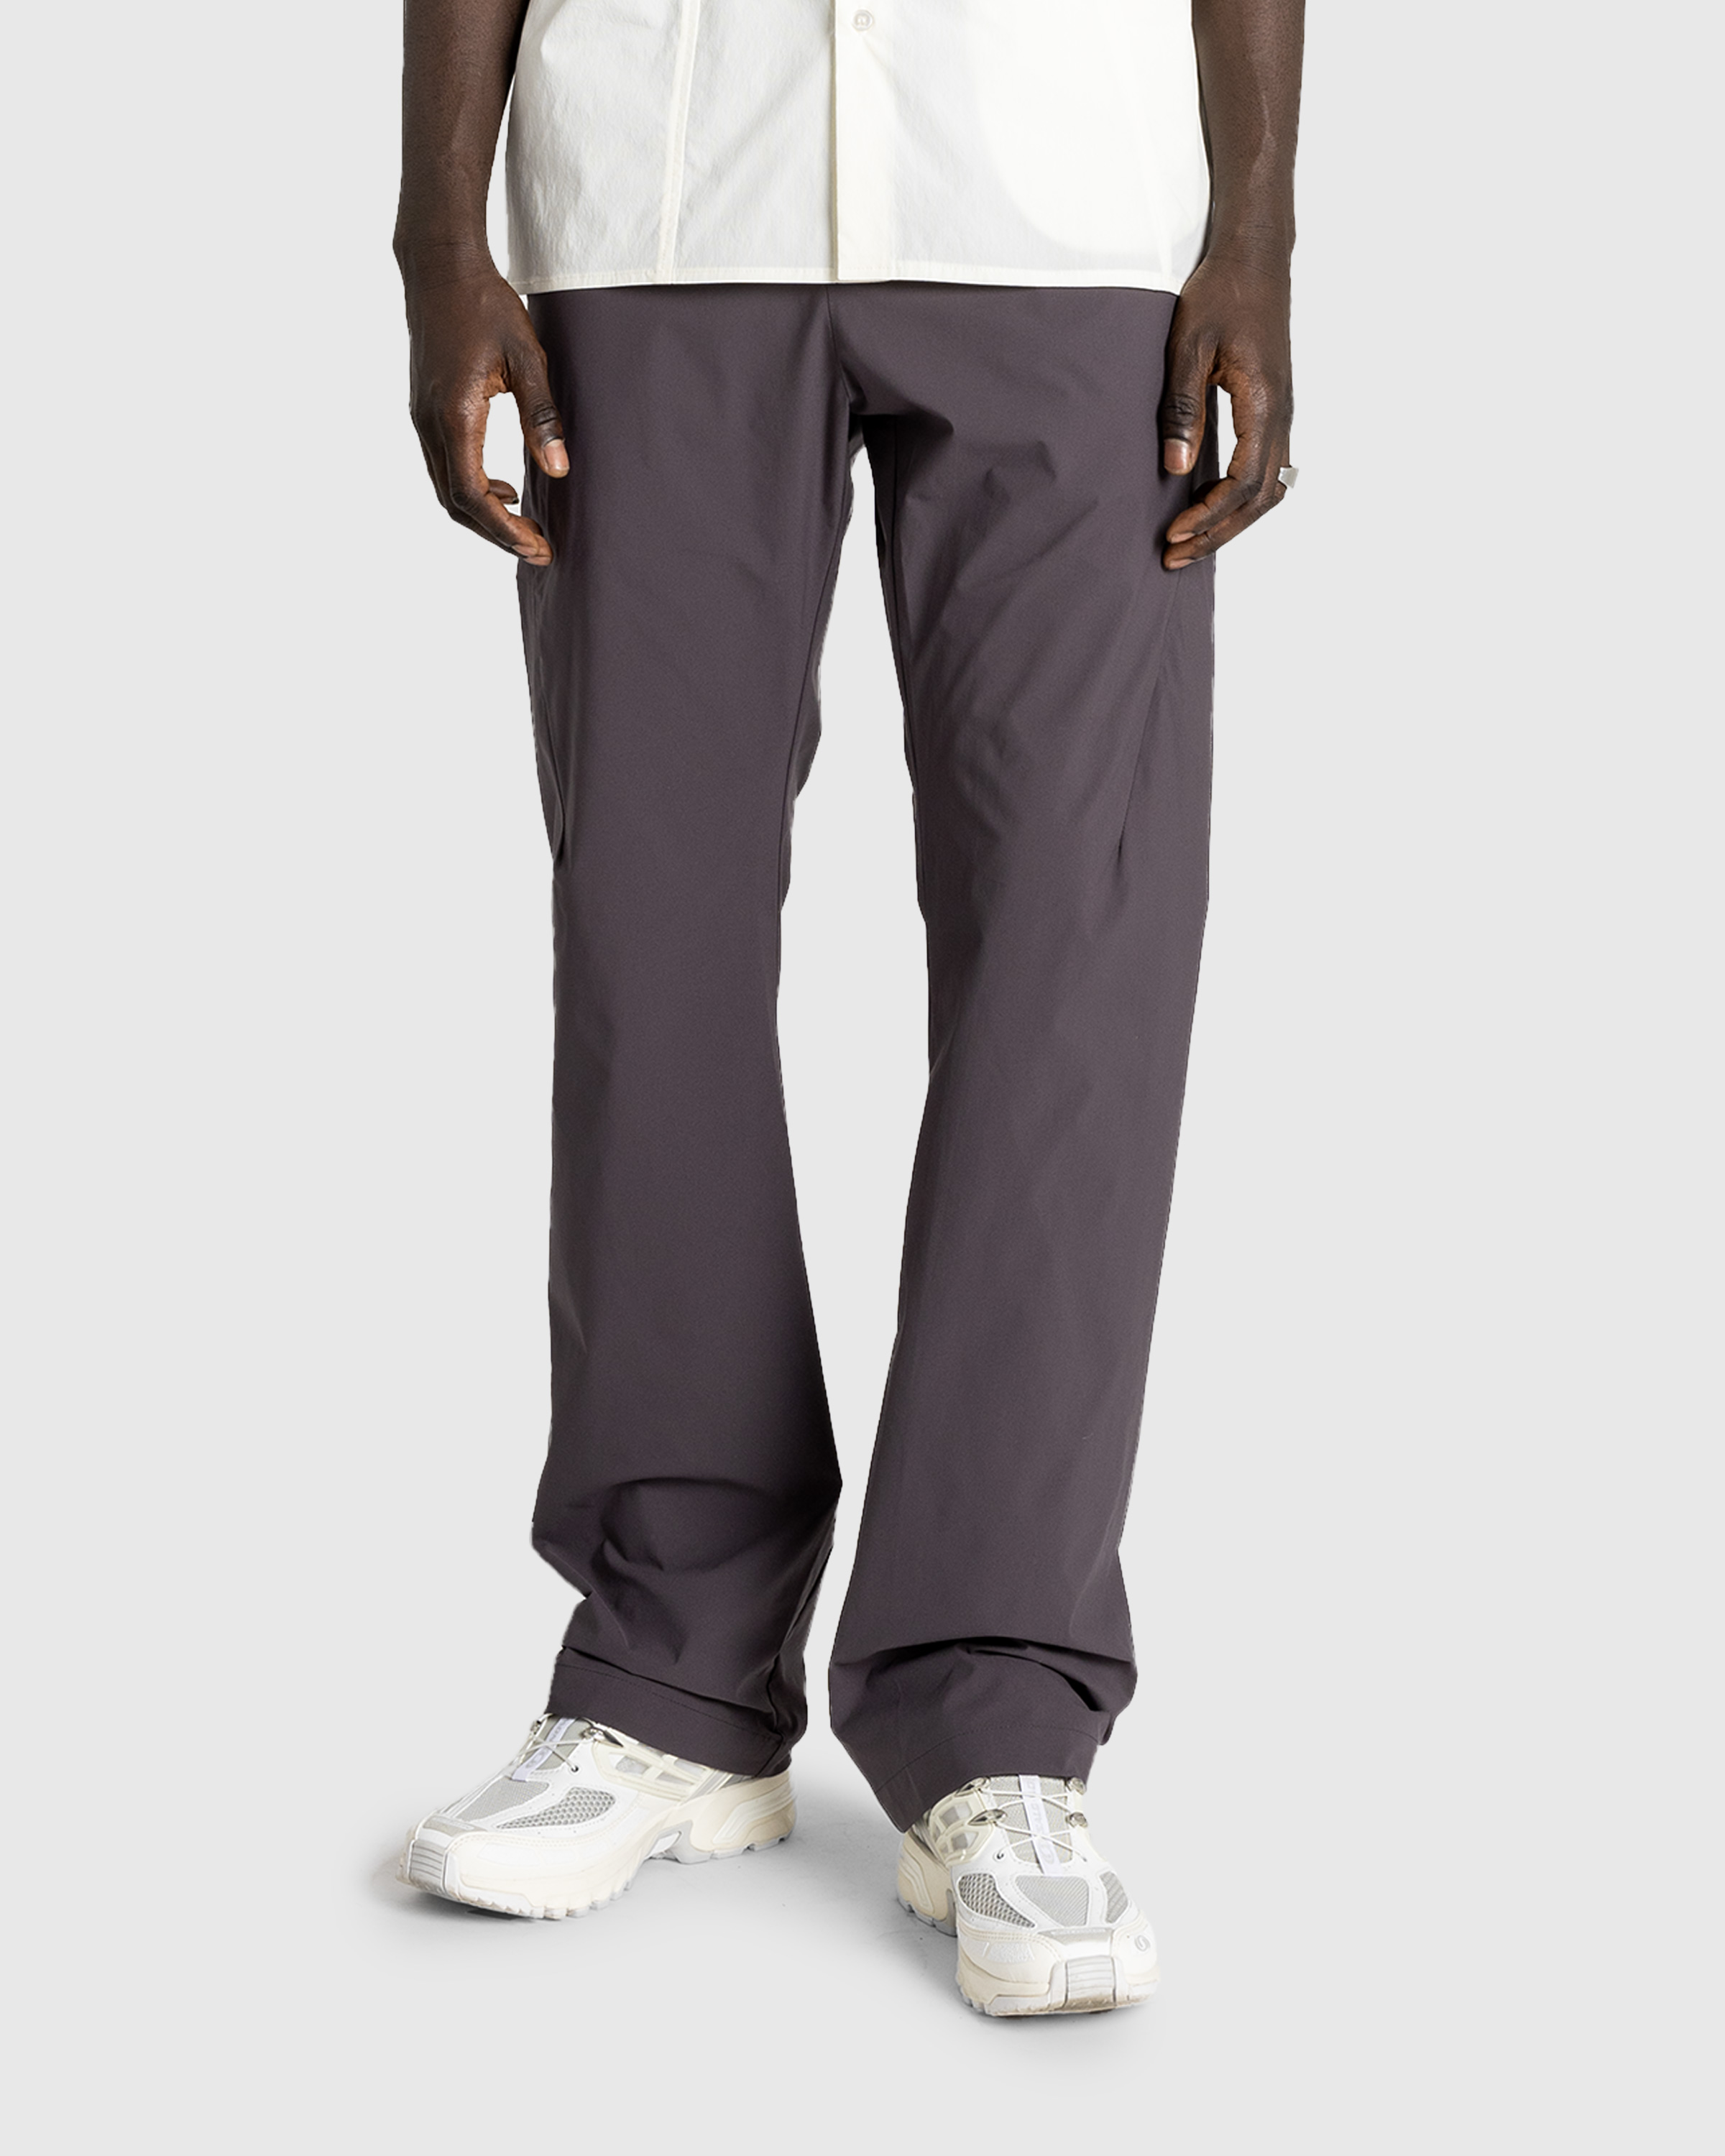 Post Archive Faction (PAF) – 6.0 Technical Pants Right Brown - Trousers - Brown - Image 2